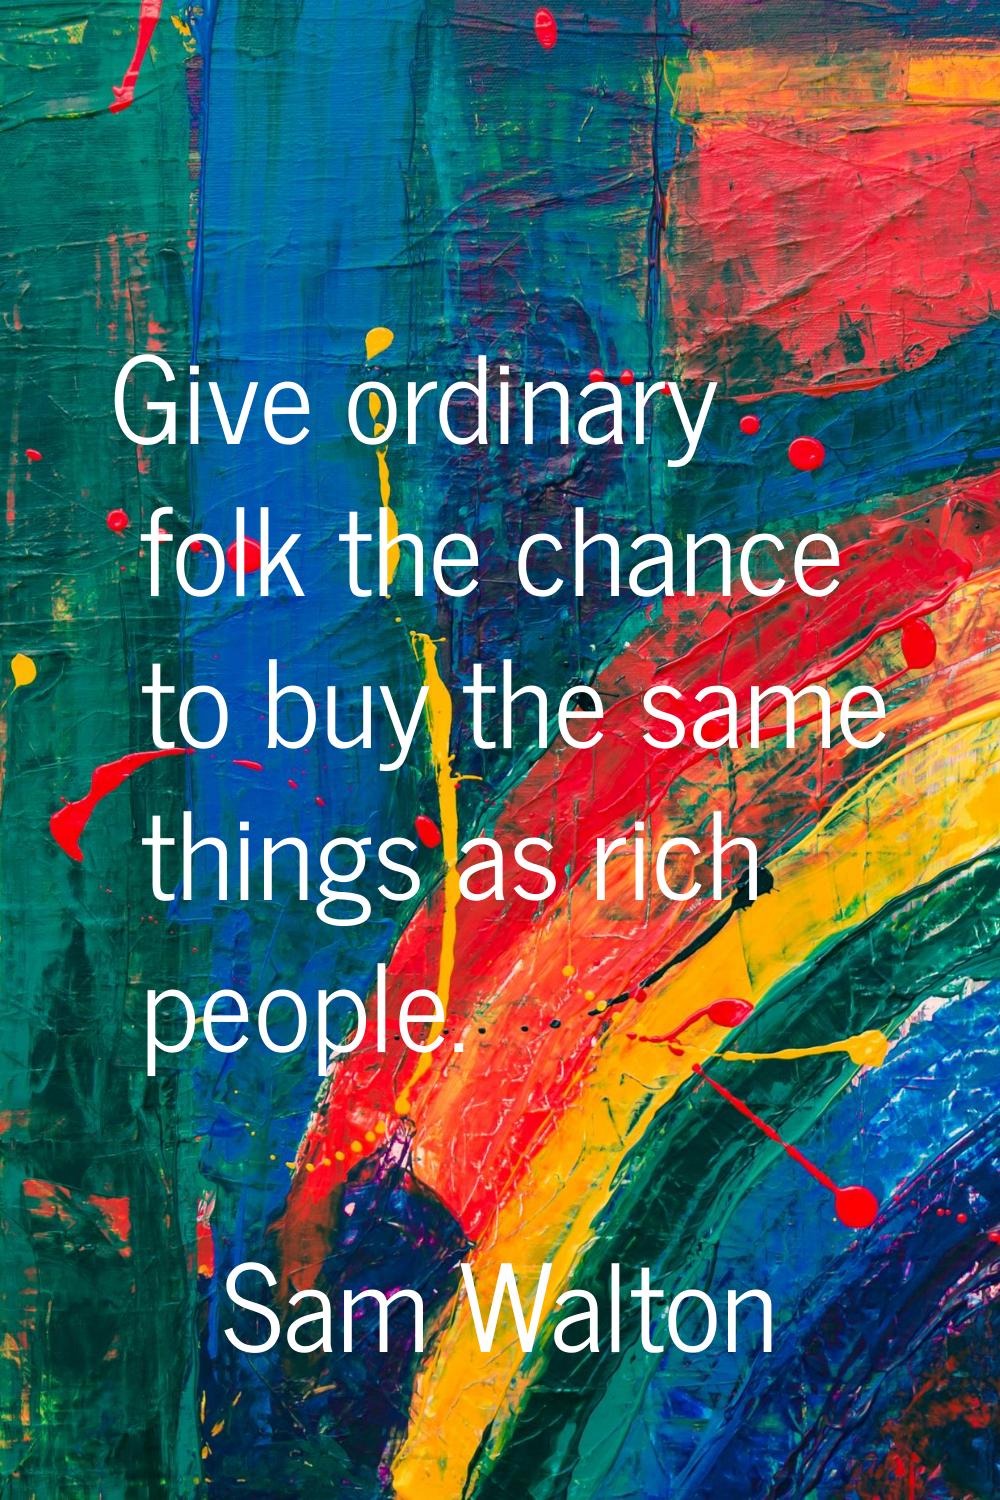 Give ordinary folk the chance to buy the same things as rich people.